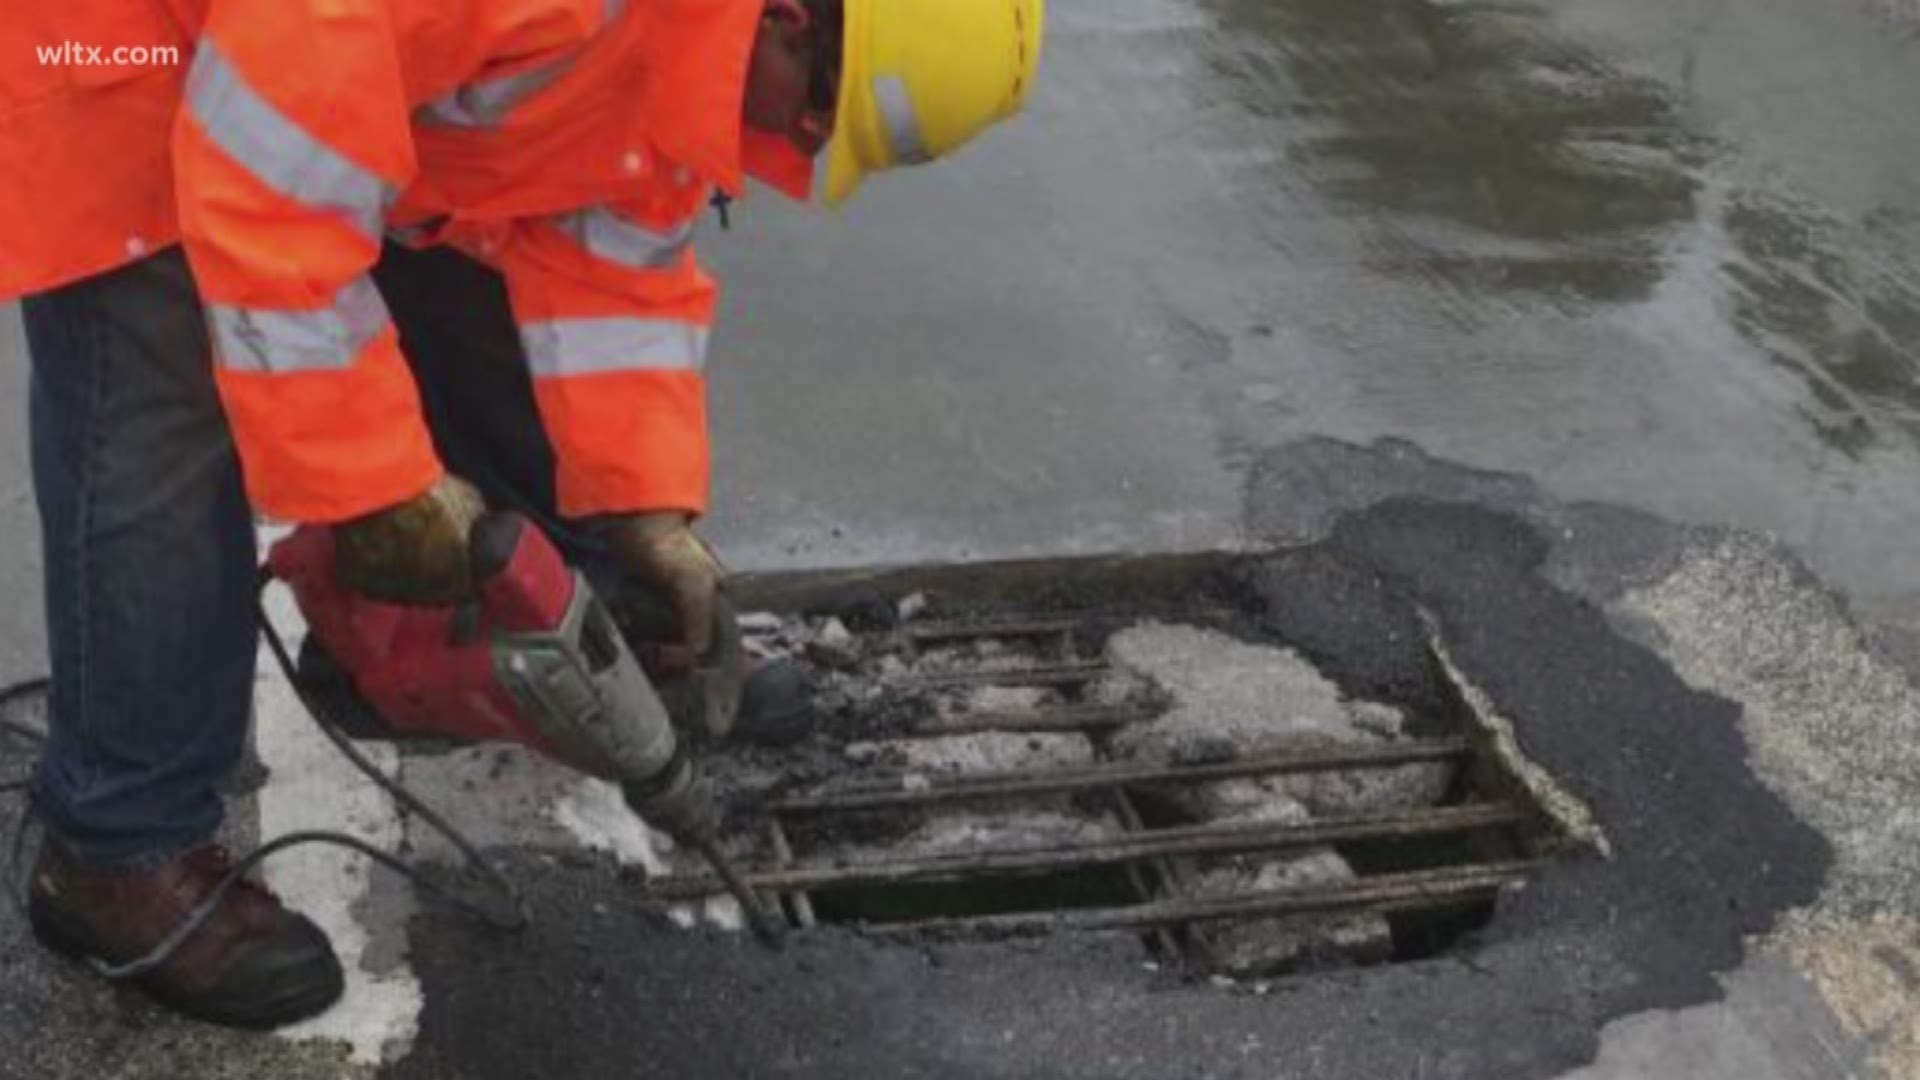 Officials say the pothole, which was caused by aging infrastructure, was reconstructed with concrete.